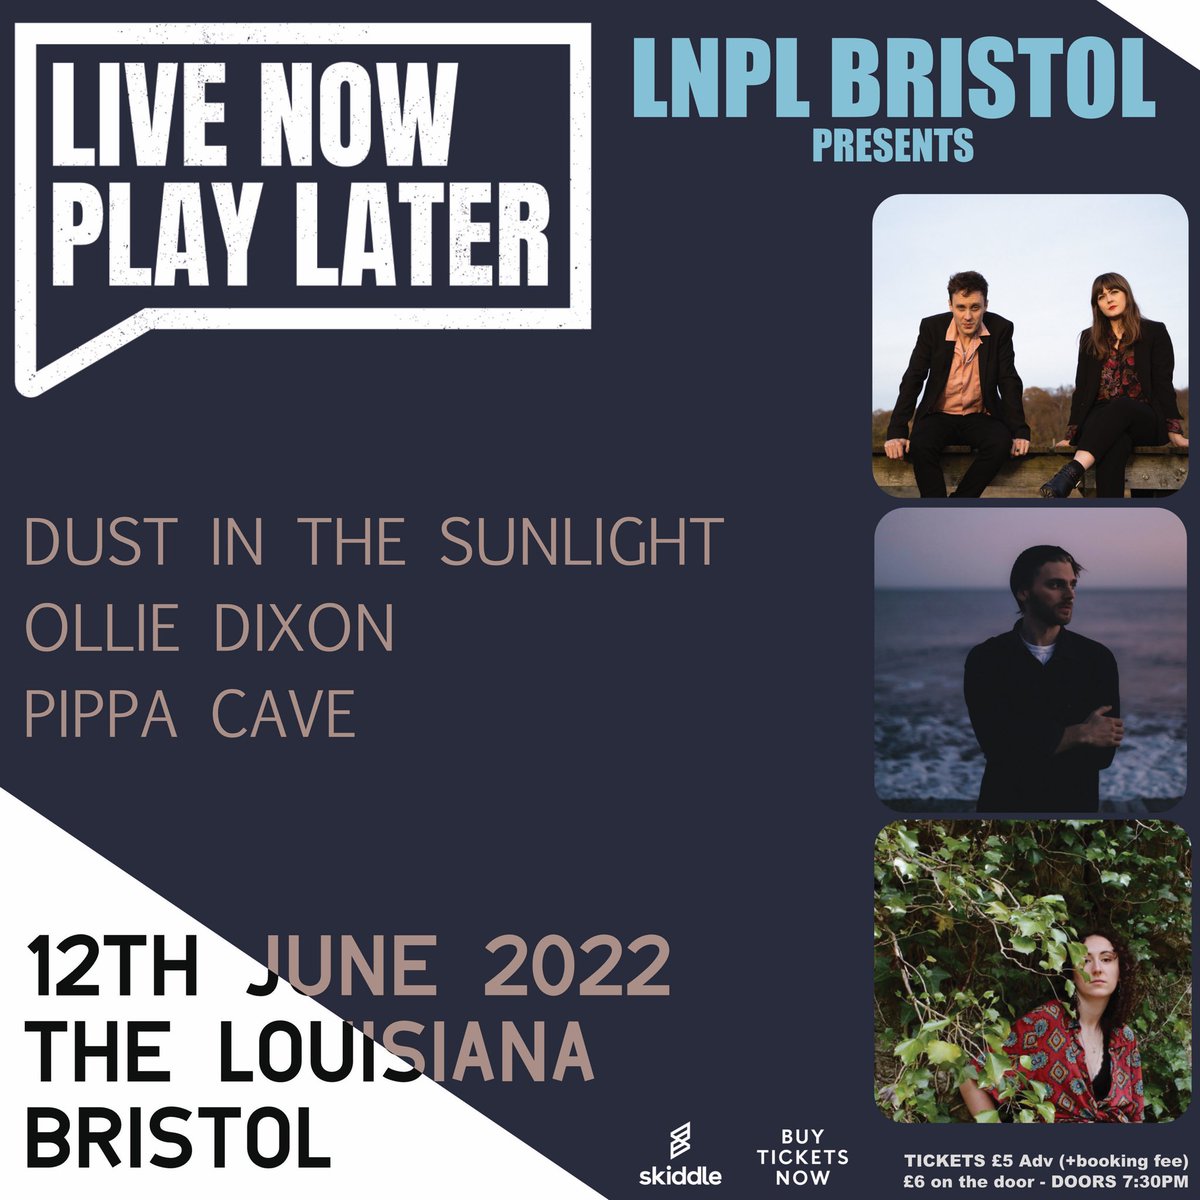 Tickets on sale now for our Bristol @live_later show in June with live music from these amazing artists/songwriters @dust_sunlight @OllieDixonmusic & Pippa Cave - link here to buy skiddle.com/e/36058329 #bristol #livemusic #whatsonbristol #bristolgigs